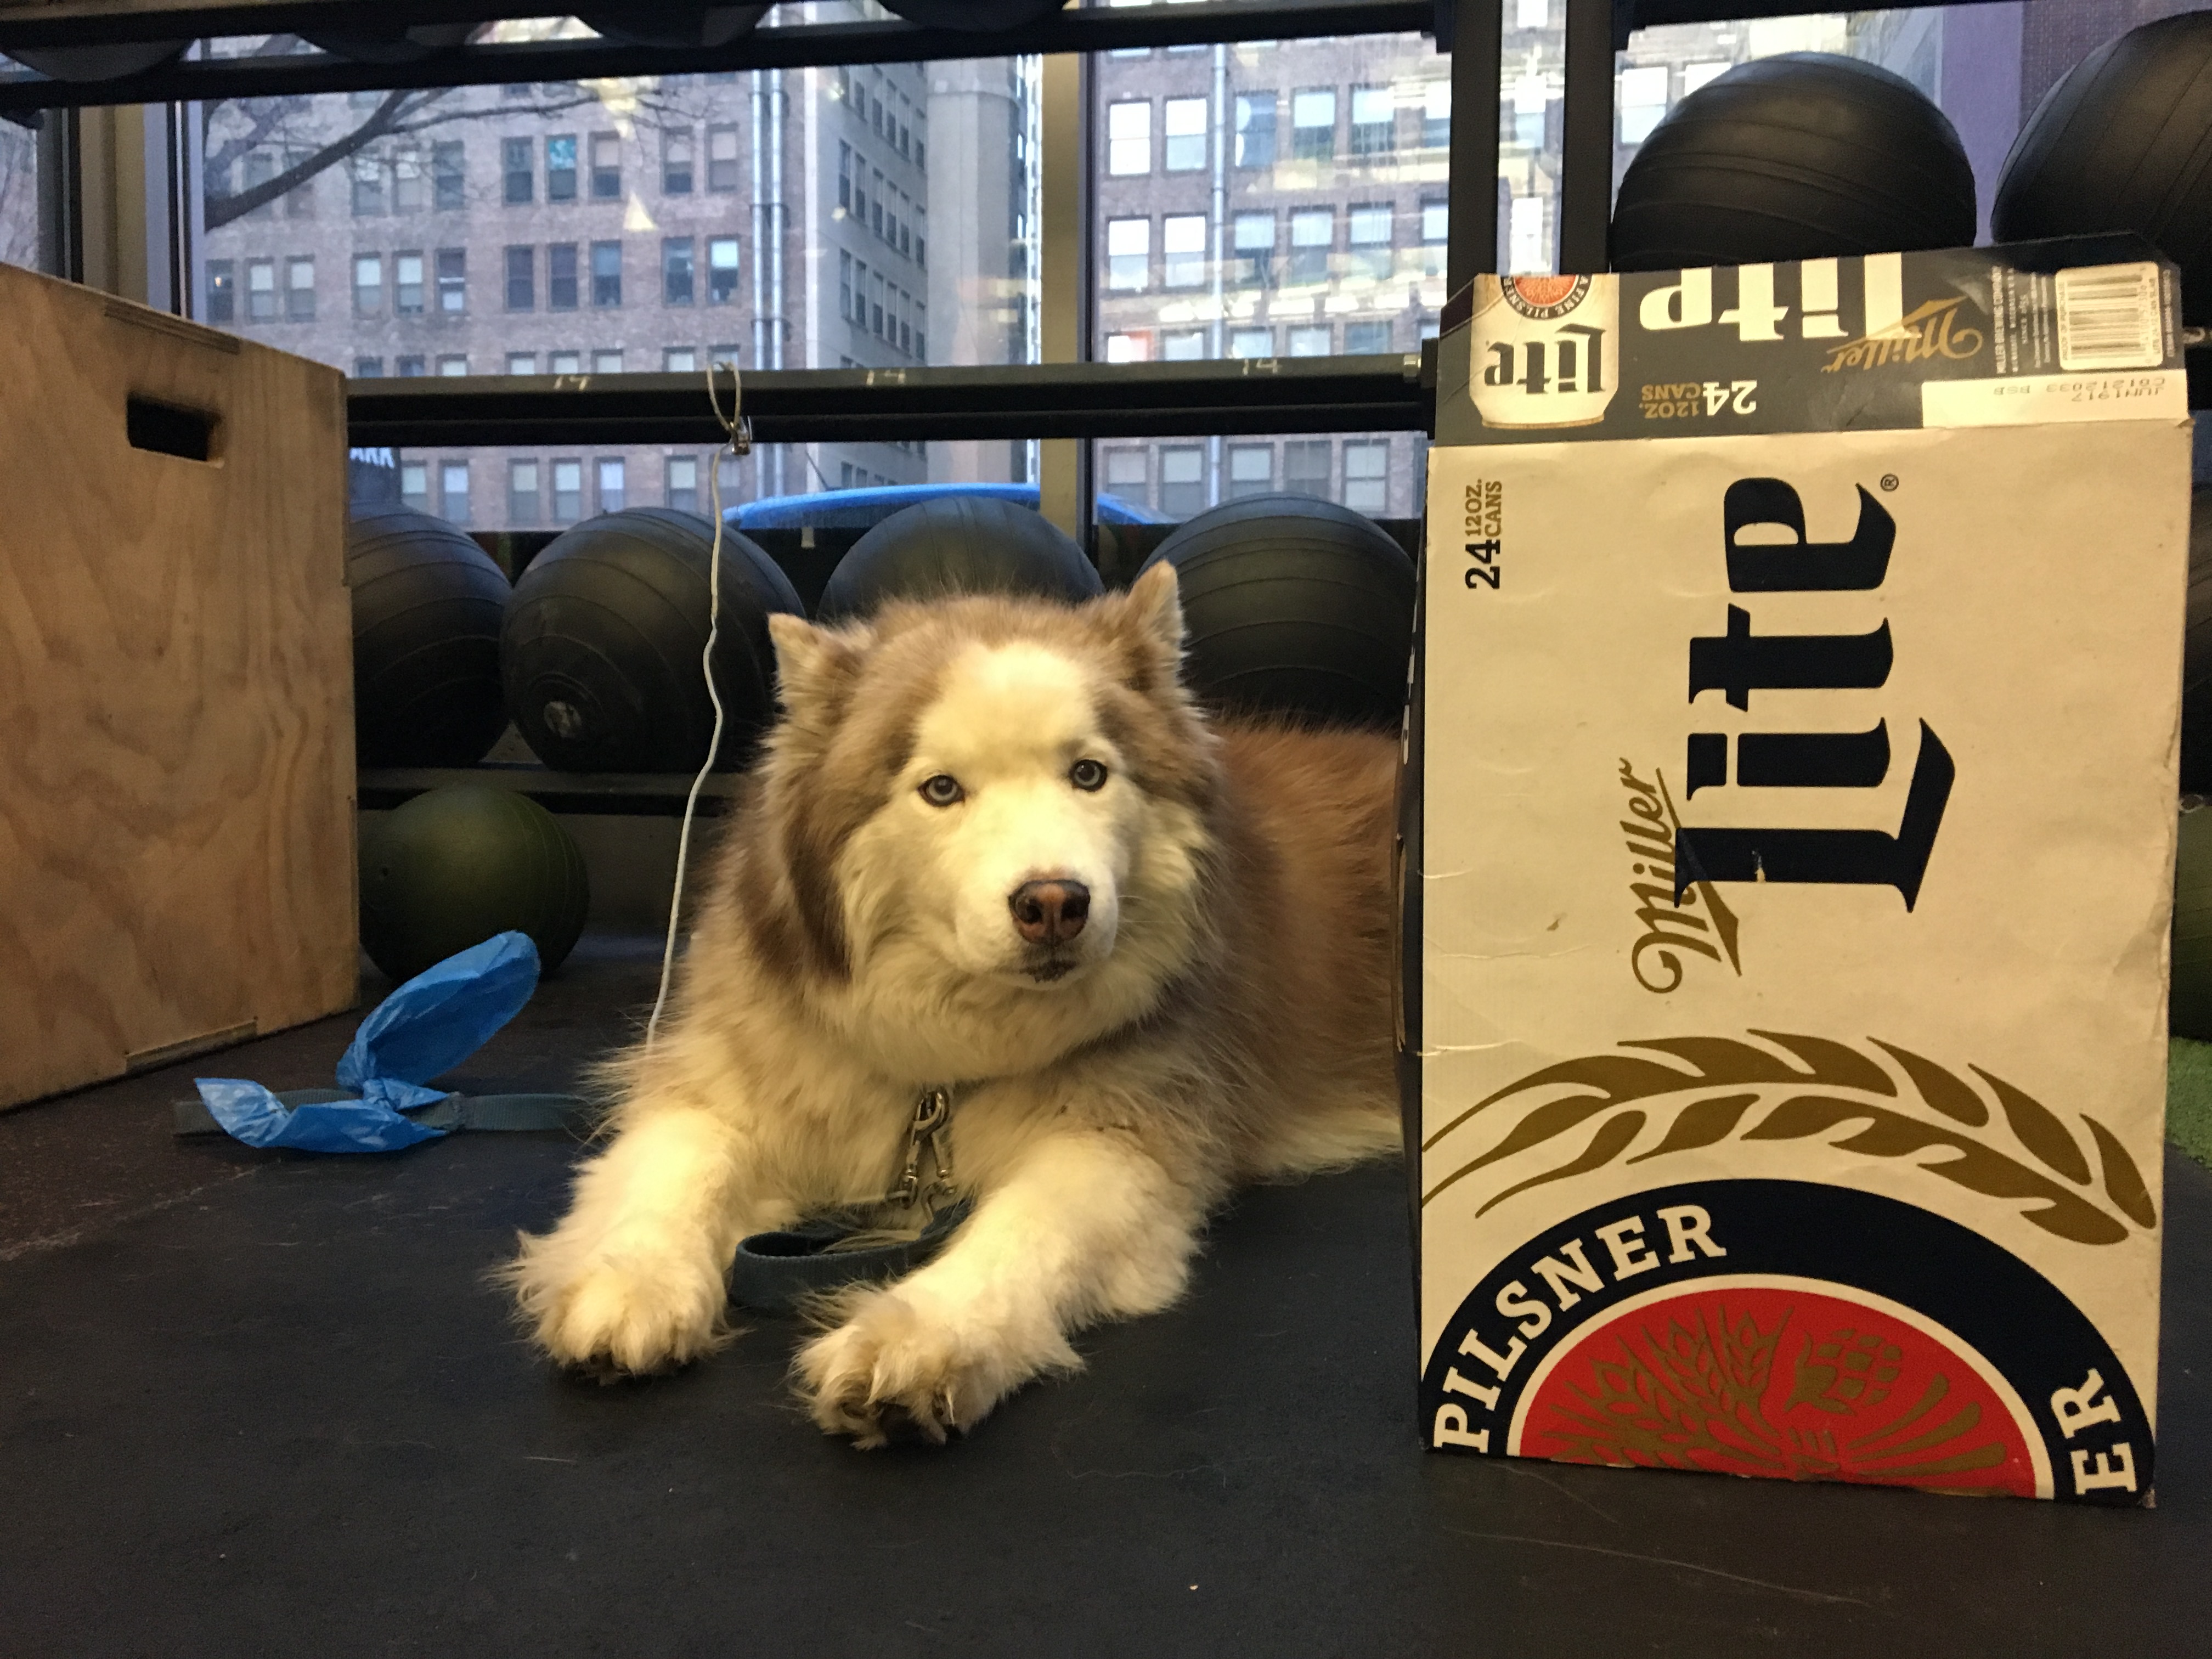 Boston guarding the beer